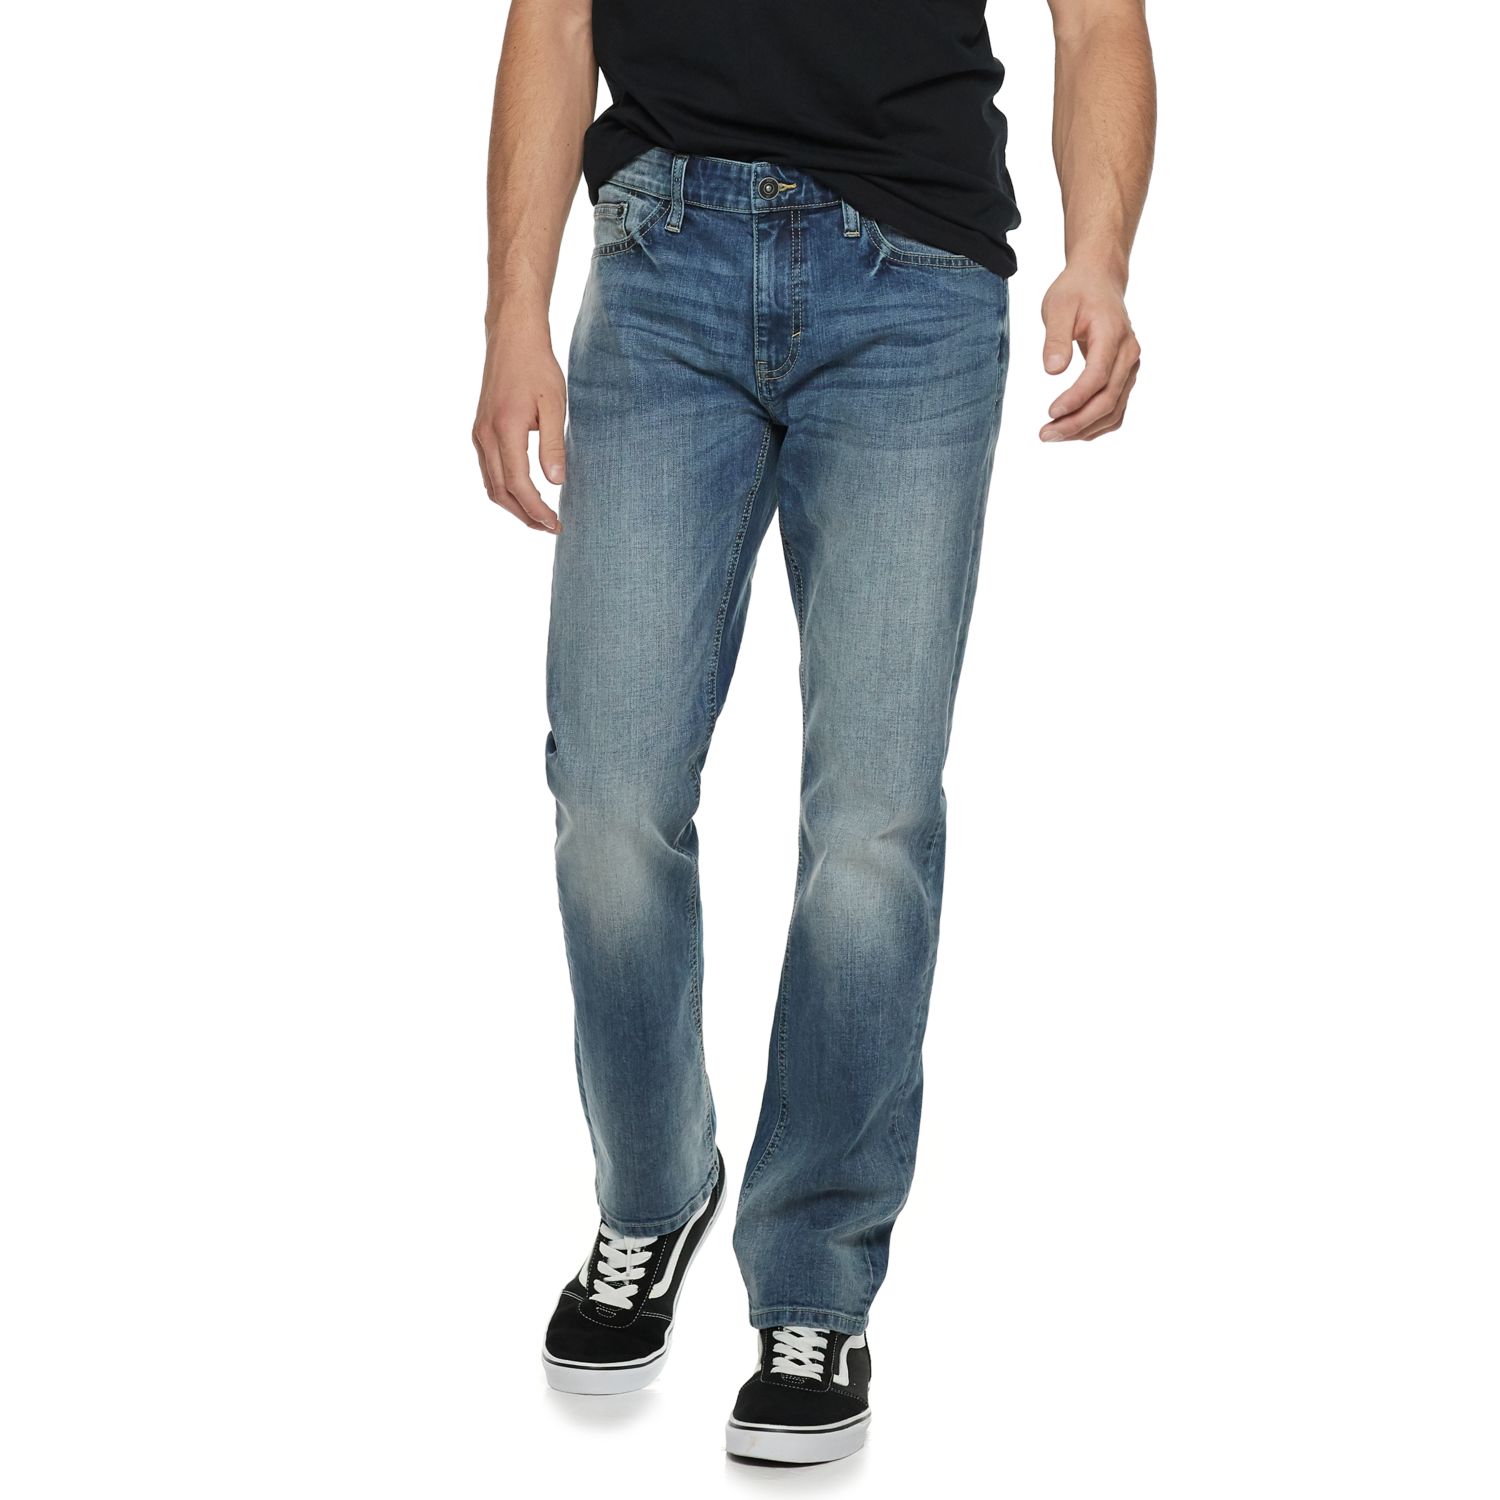 ring of fire jeans for men